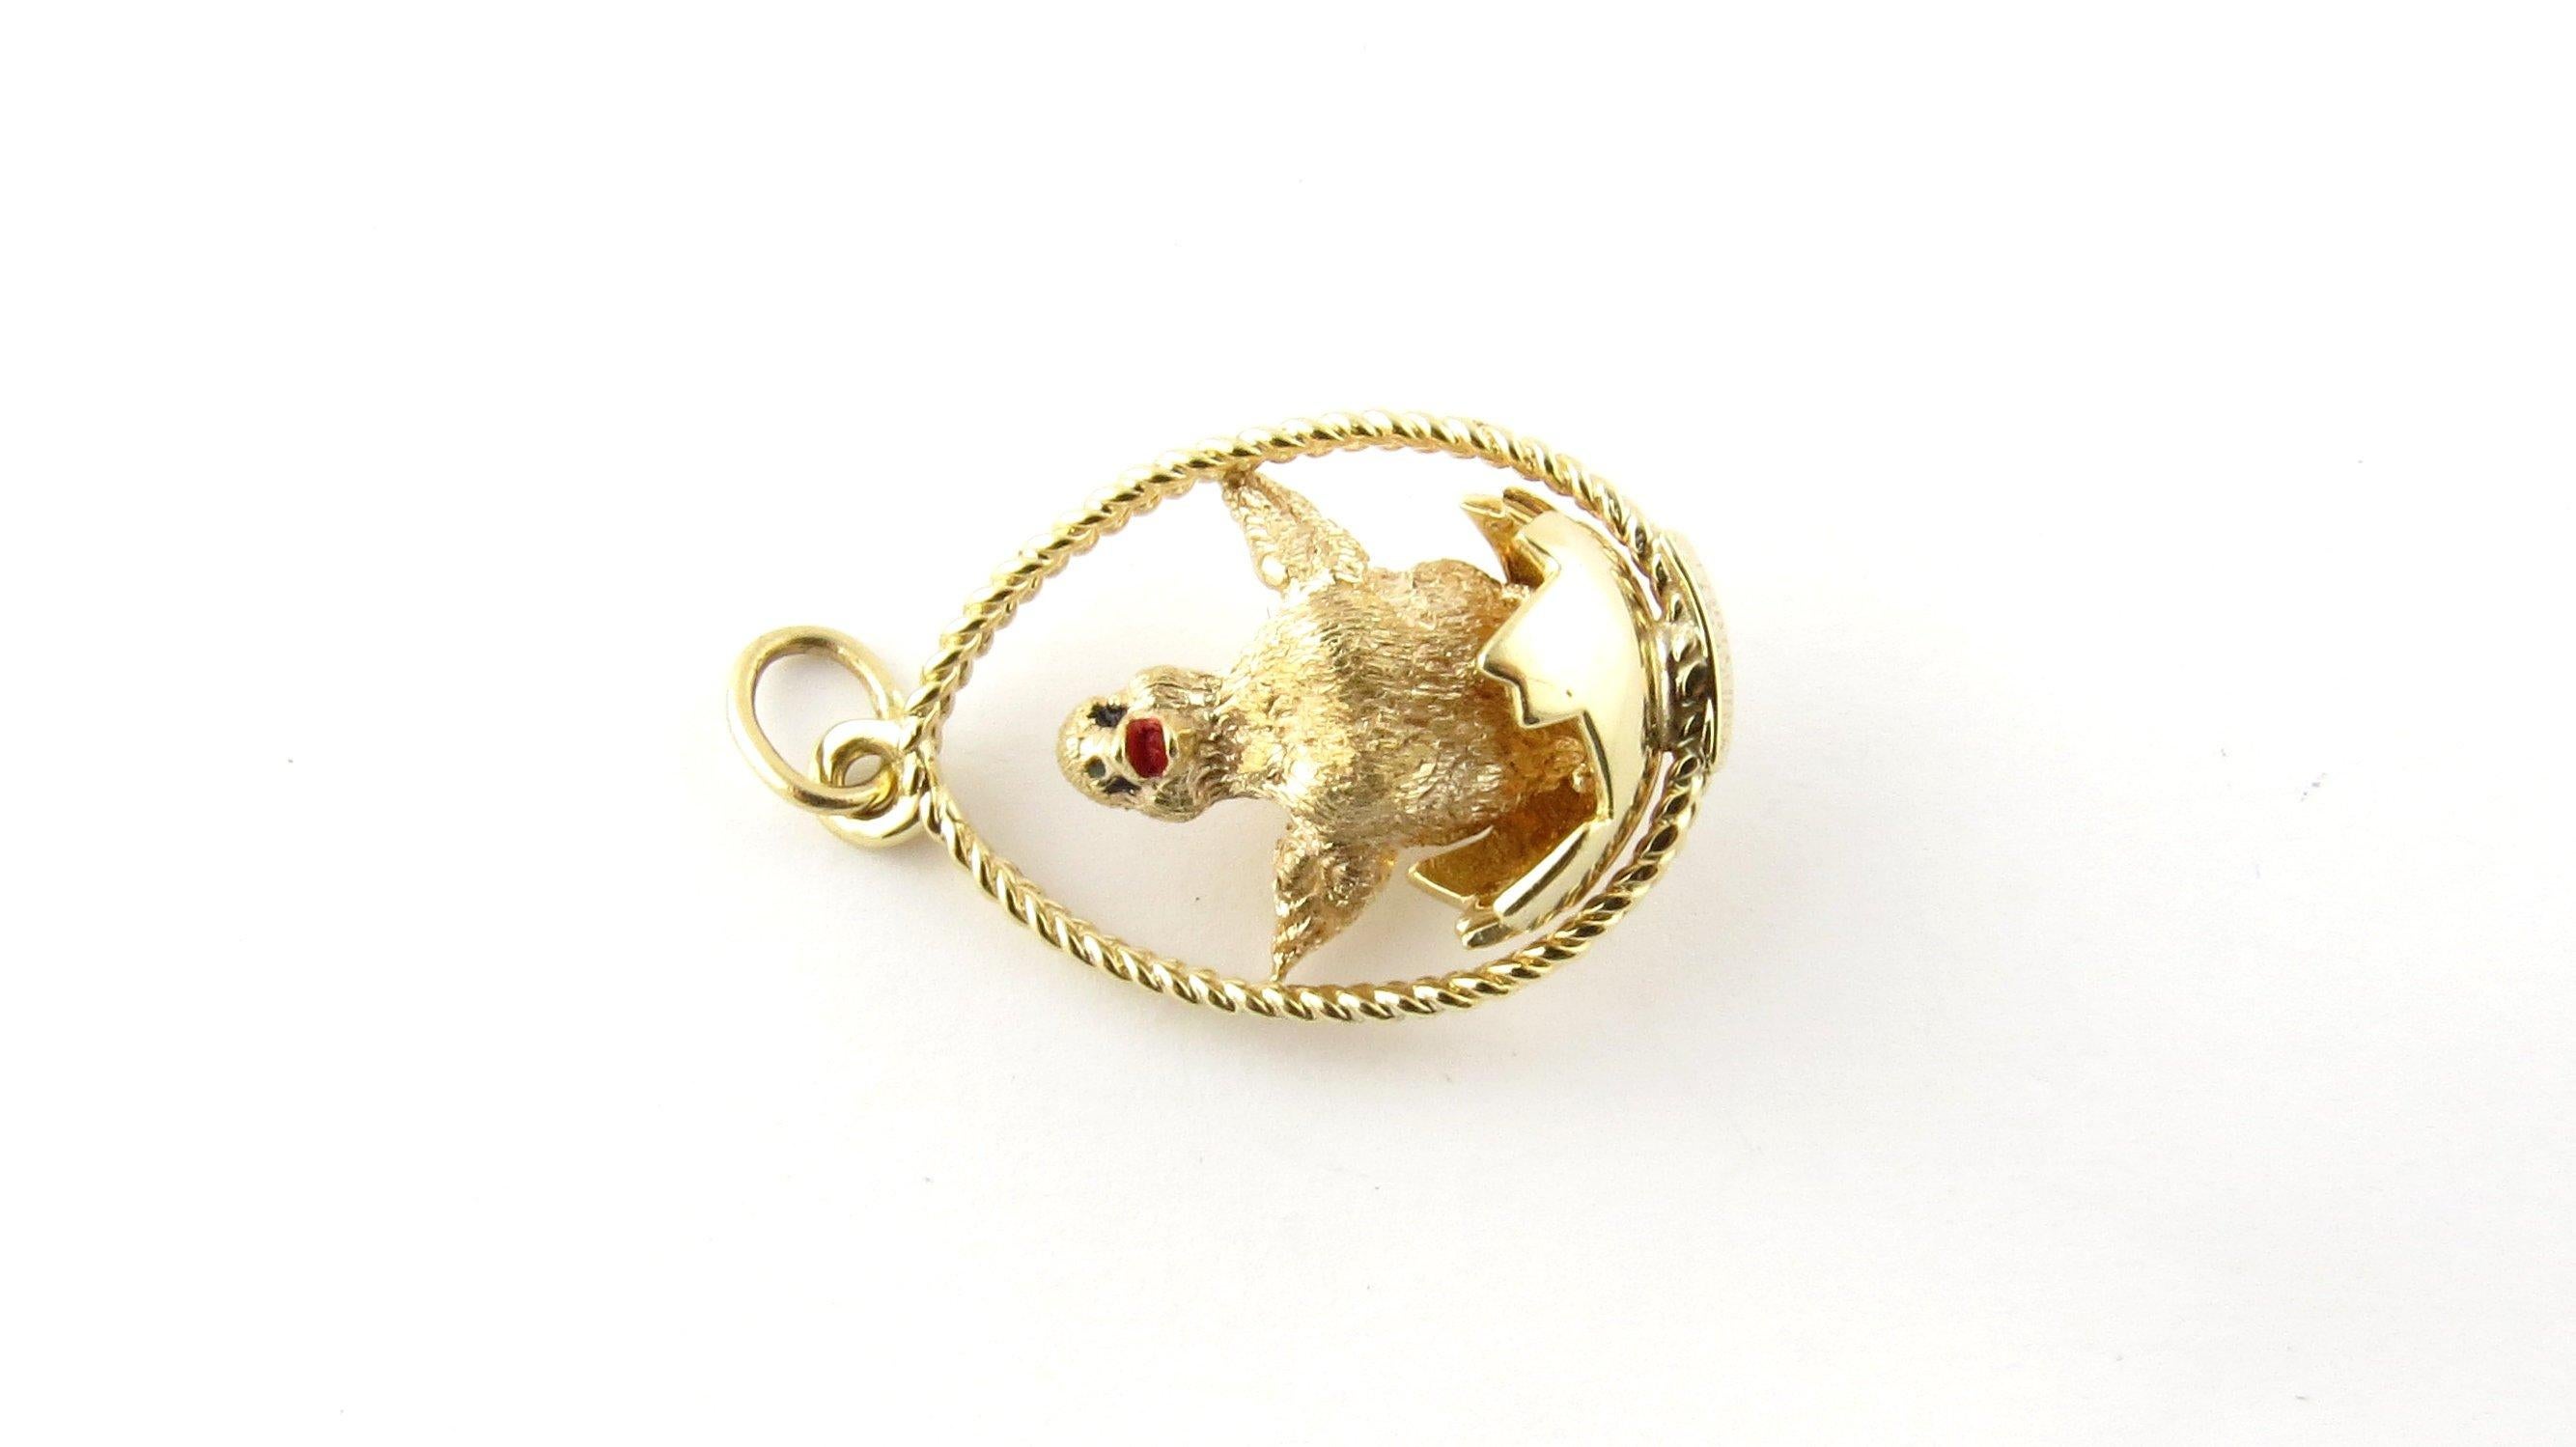 Vintage 14 Karat Yellow Gold Chick in Egg Charm. This beautiful 3D charm features an adorable baby chick coming out of his egg meticulously detailed in 14K yellow gold.
Size: 27 mm x 18 mm (actual charm). Weight: 4.7 dwt. / 7.4 gr. Stamped: